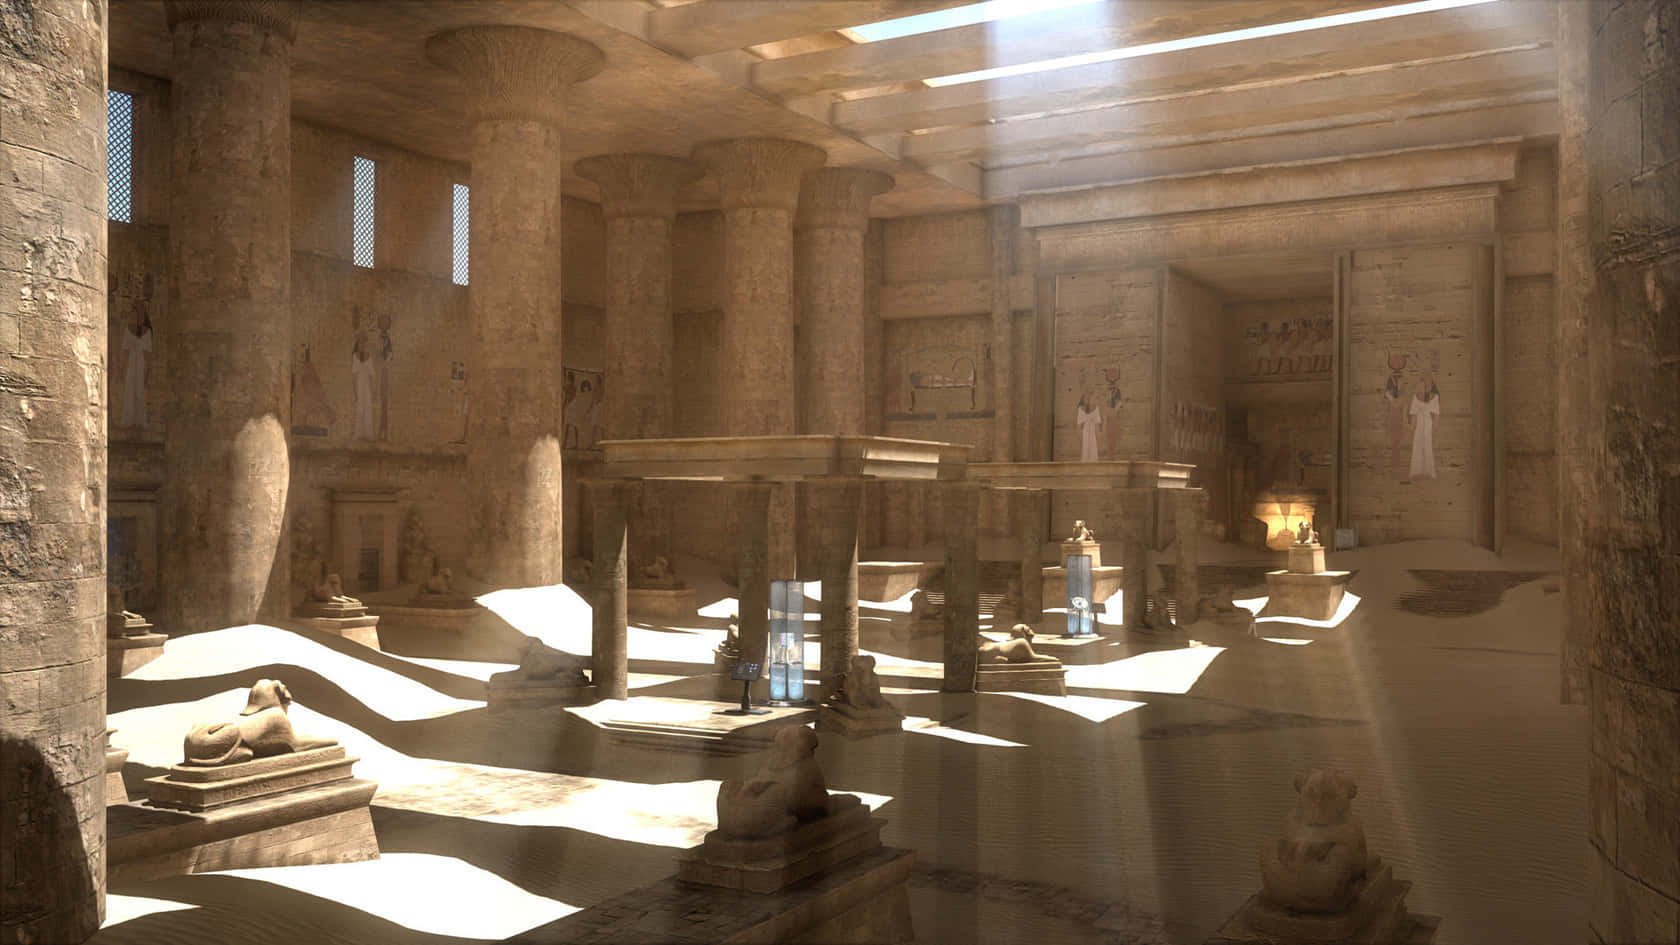 The Tomb In The Talos Principle Background